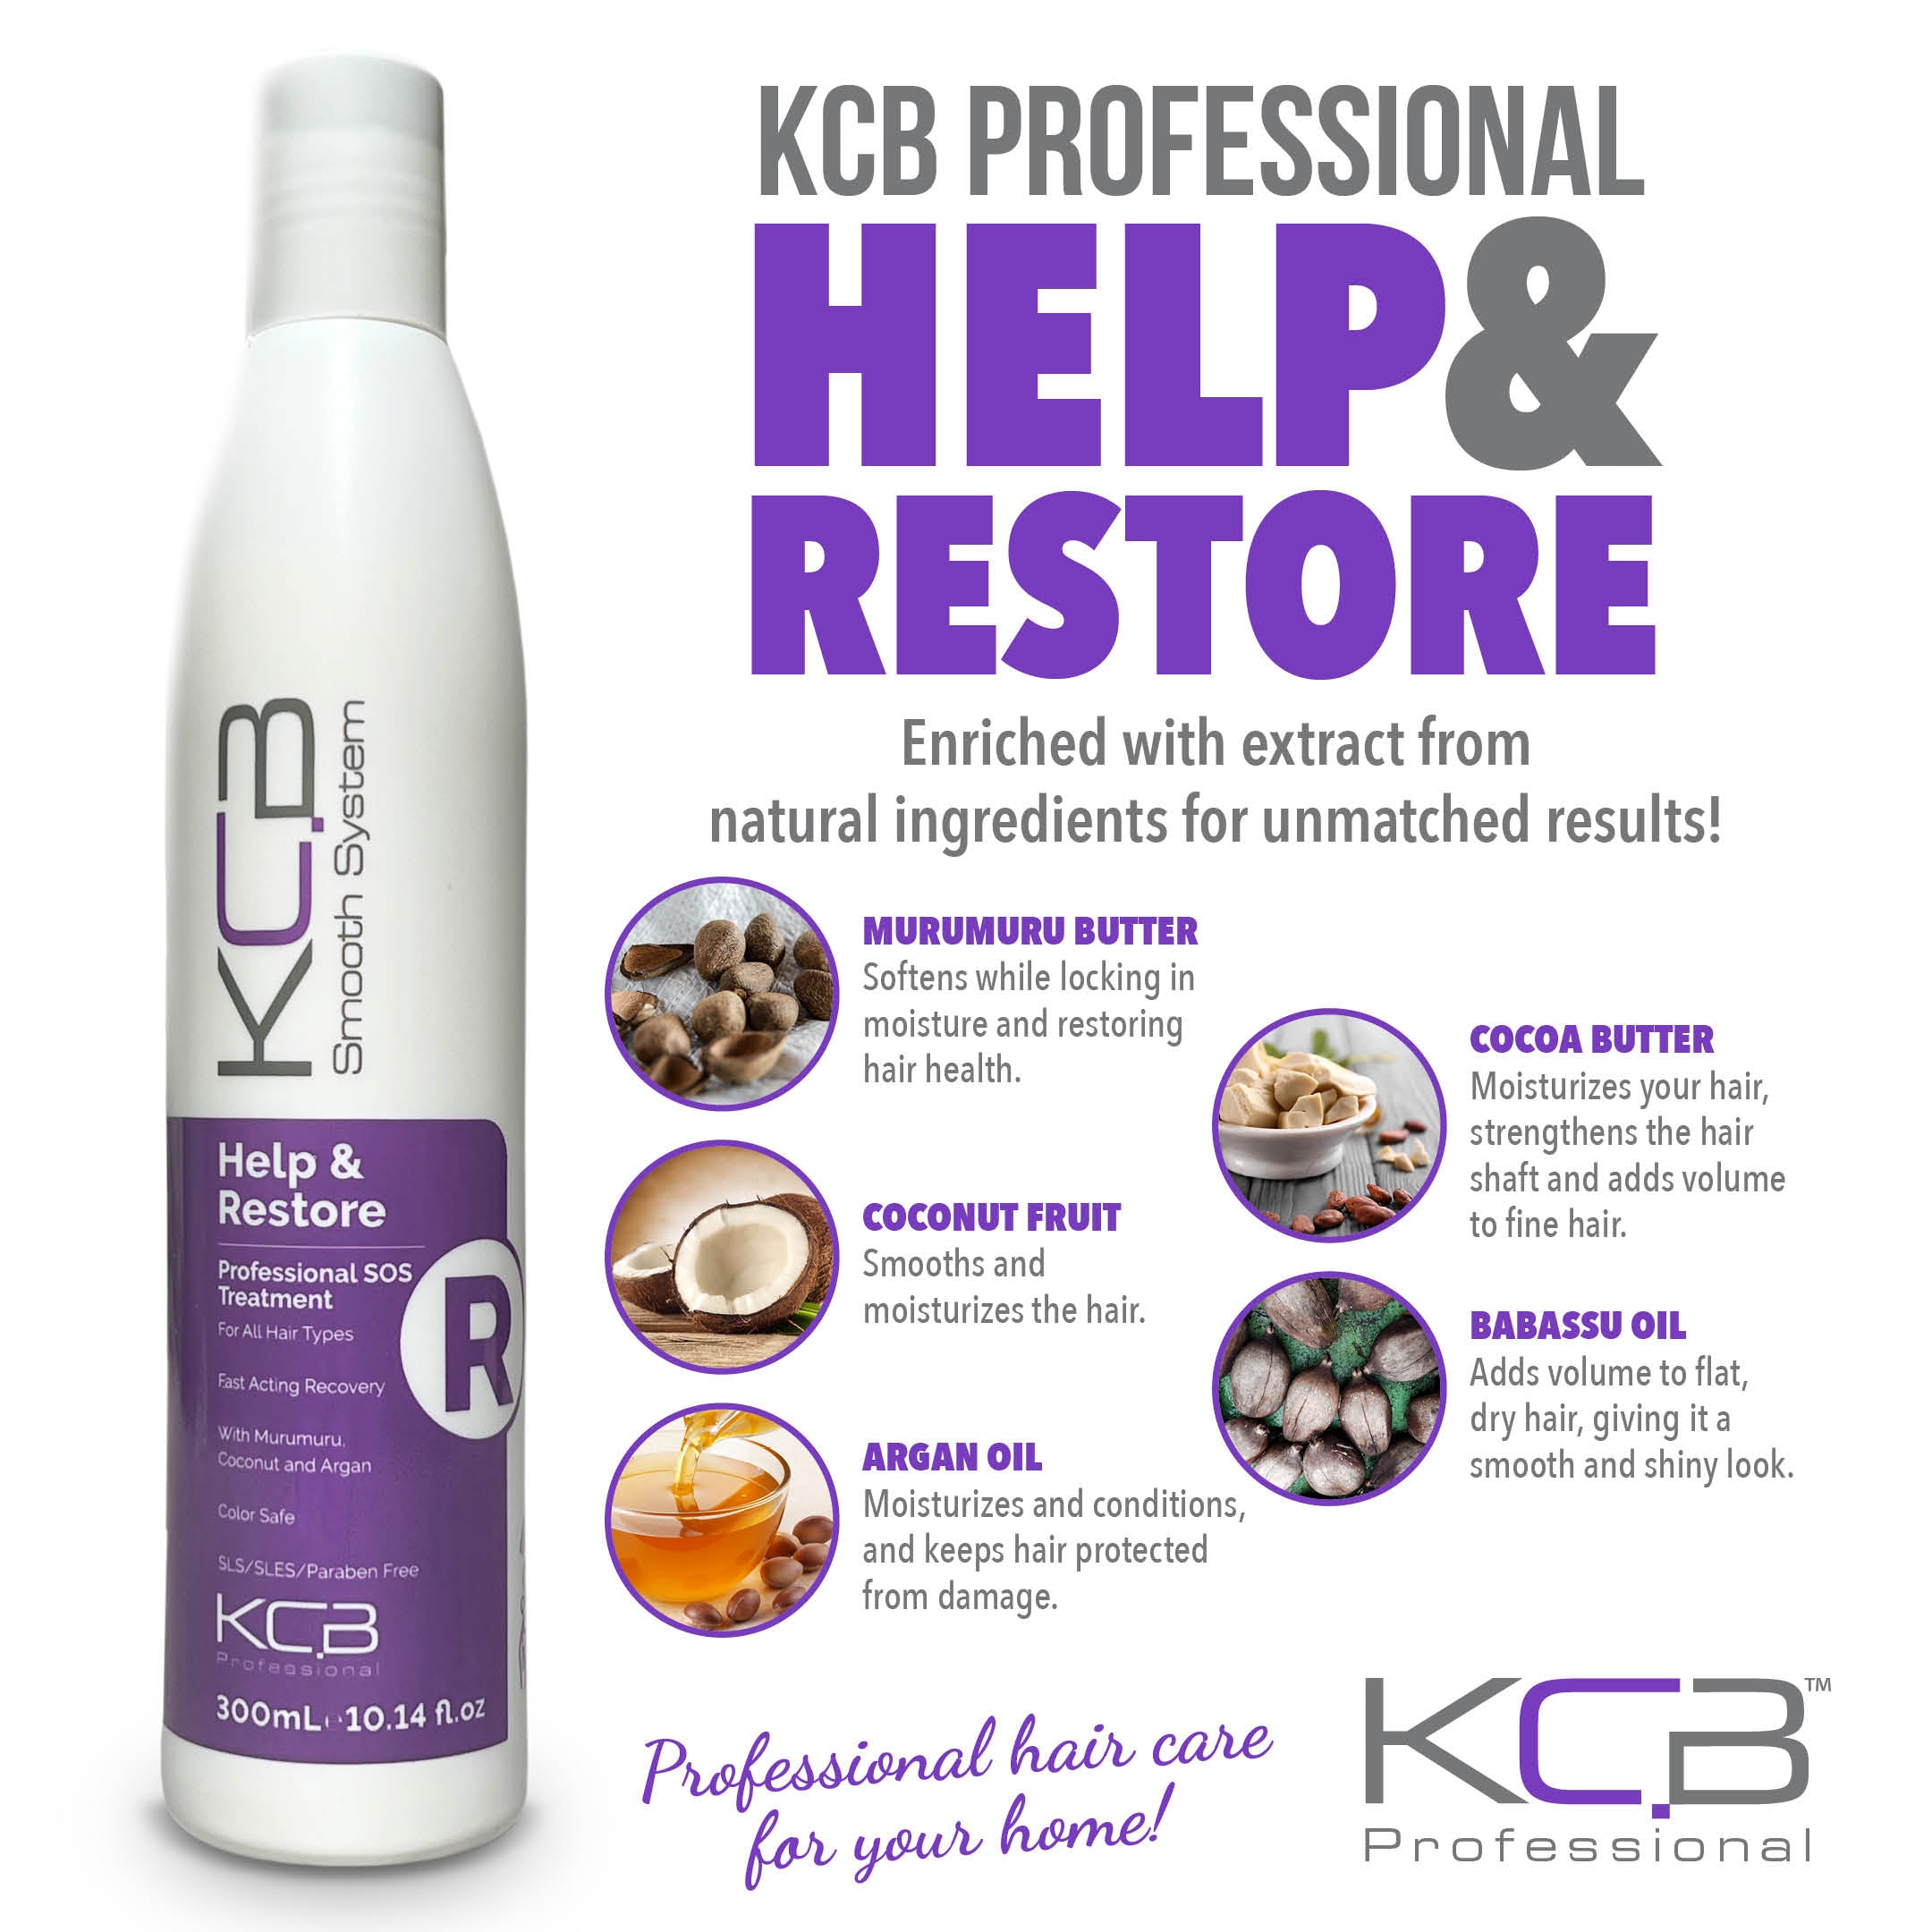 KCB Professional Smooth Repair Hair Mask for Smoothing, Deep Conditioning,  Bonding Hair Treatment, Frizz Control, All Hair Types, 17.63 oz / 500g.